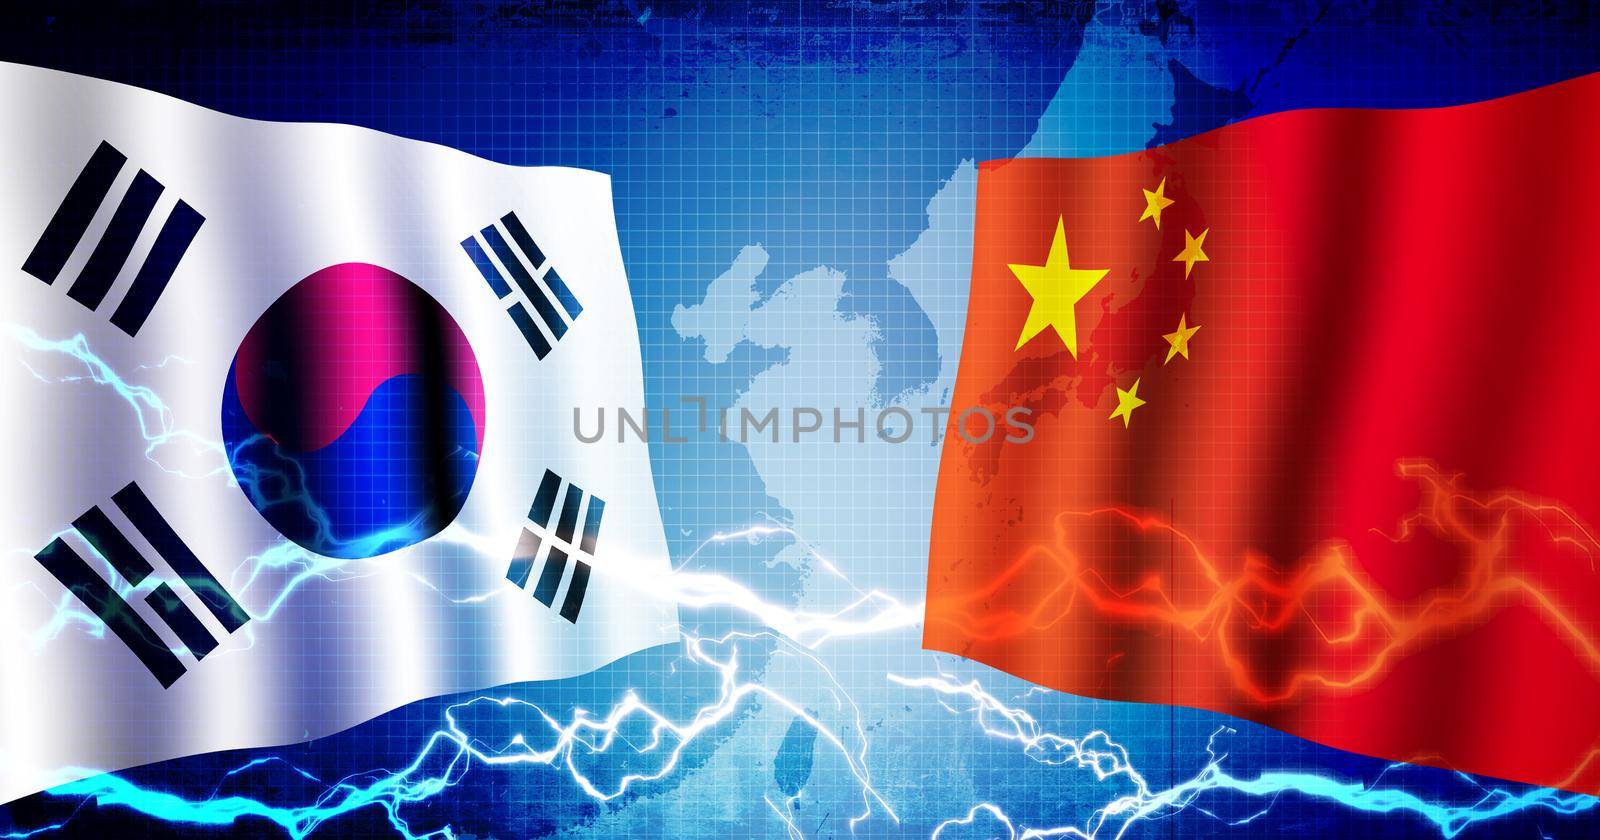 Political confrontation between South korea and china / web banner background illustration